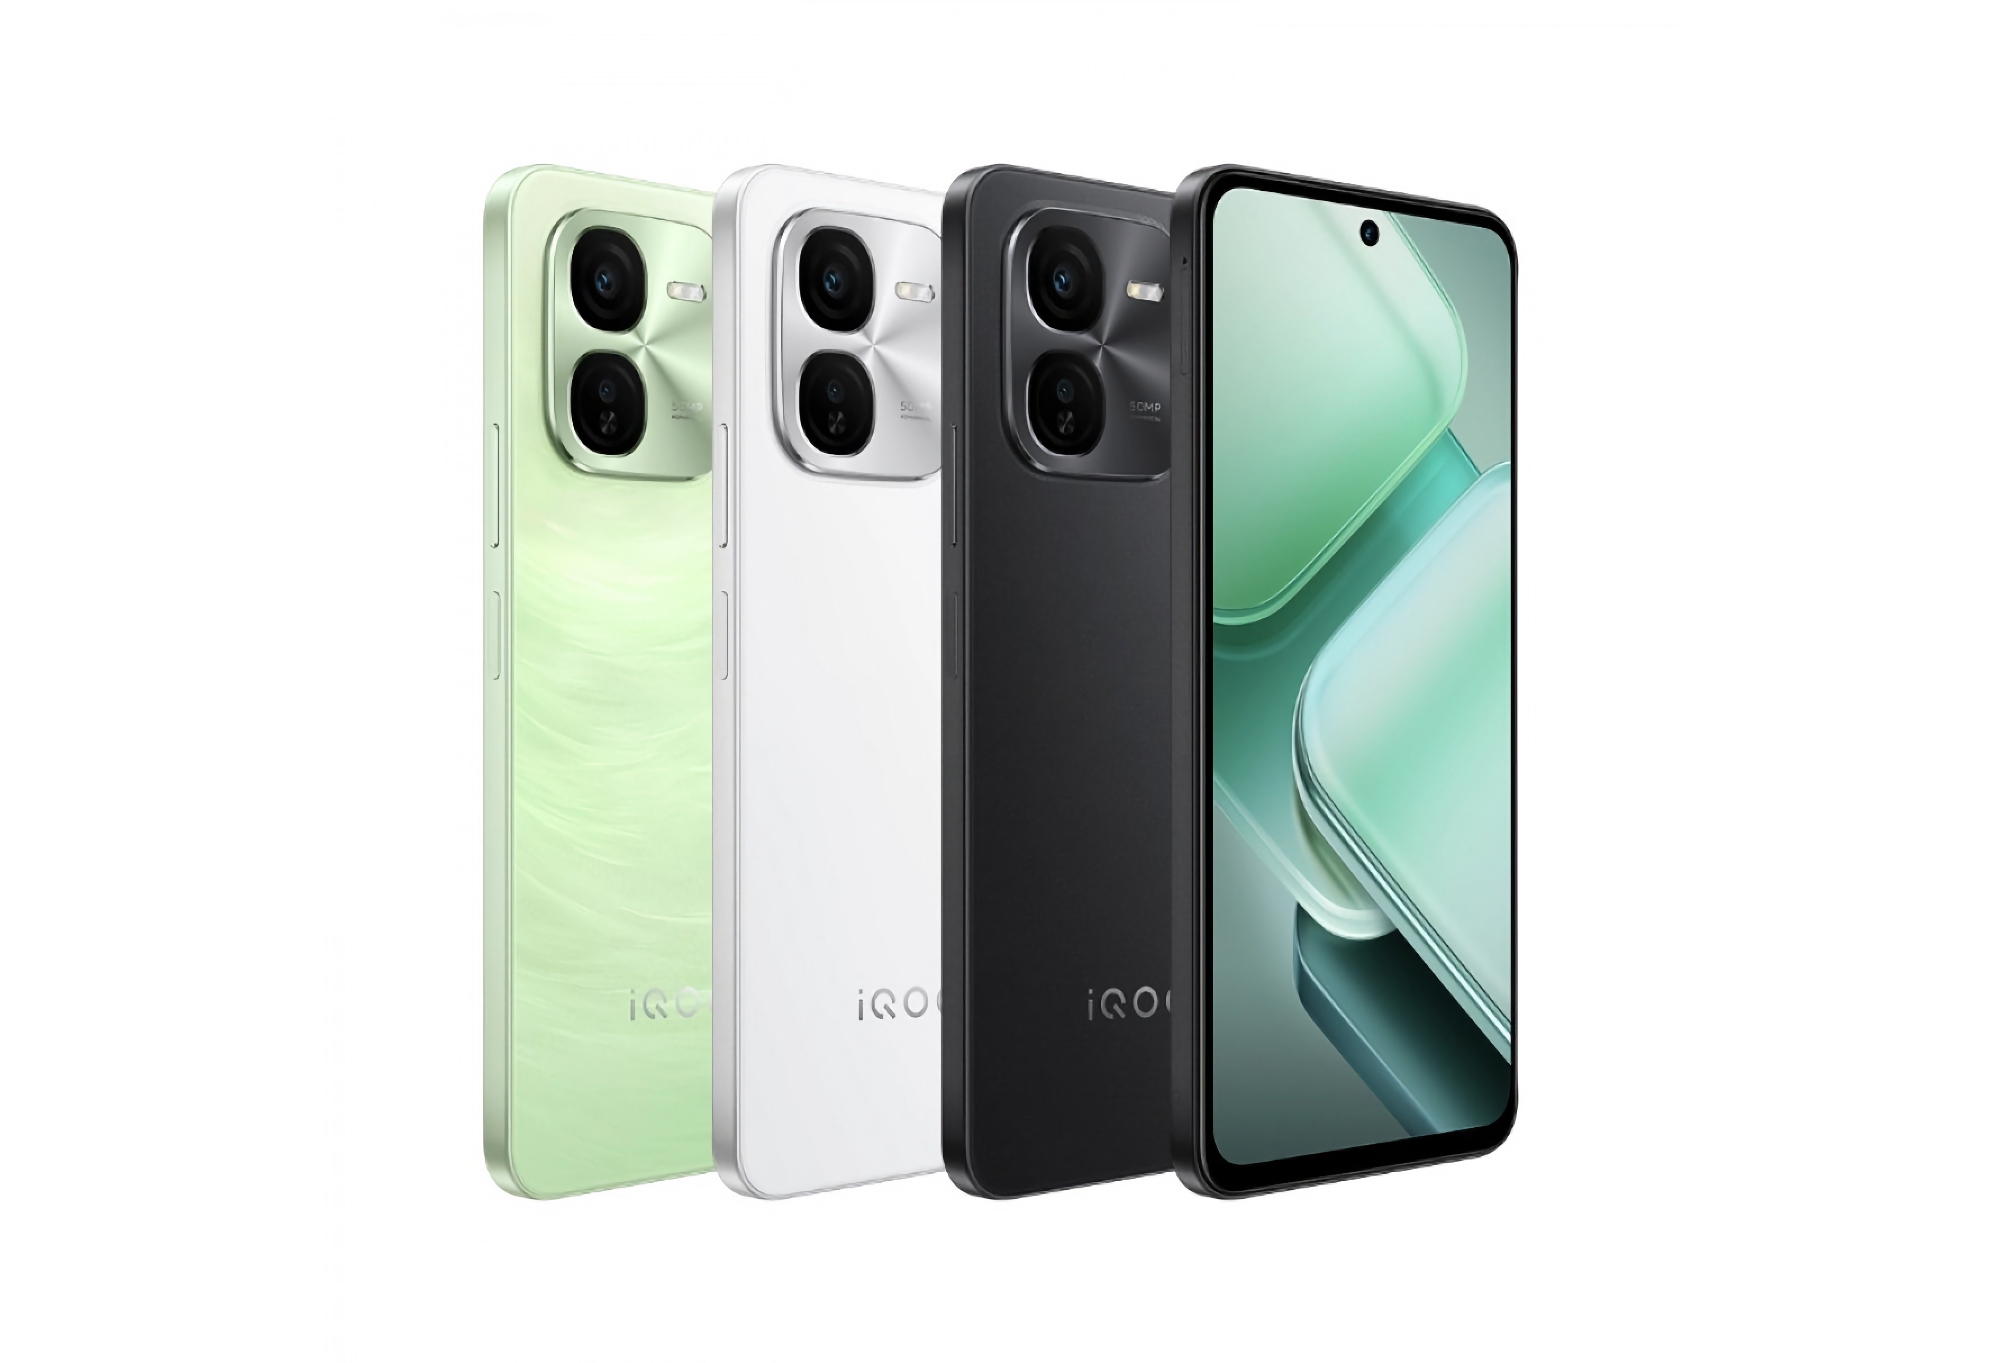 iQOO Z9x: the base model of the series with Snapdragon 6 Gen 1 processor, 120Hz LCD and 44W charging